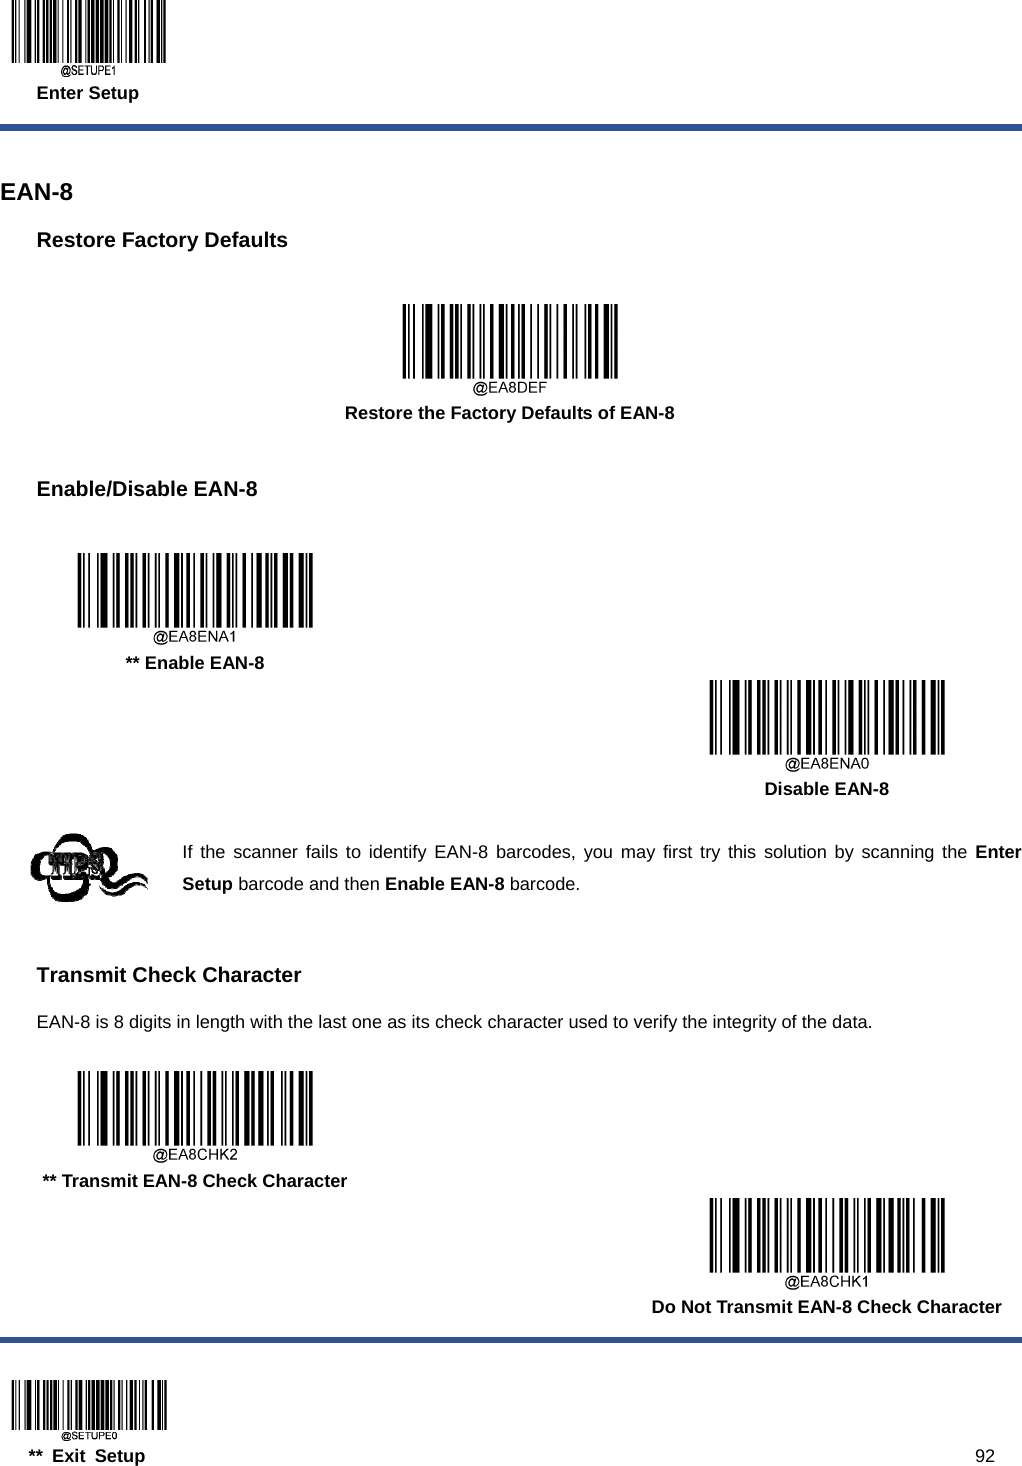  Enter Setup  ** Exit Setup                                                                                           92  EAN-8 Restore Factory Defaults   Restore the Factory Defaults of EAN-8  Enable/Disable EAN-8     ** Enable EAN-8      Disable EAN-8  If the scanner fails to identify EAN-8 barcodes, you may first try this solution by scanning the Enter Setup barcode and then Enable EAN-8 barcode.  Transmit Check Character EAN-8 is 8 digits in length with the last one as its check character used to verify the integrity of the data.     ** Transmit EAN-8 Check Character      Do Not Transmit EAN-8 Check Character 